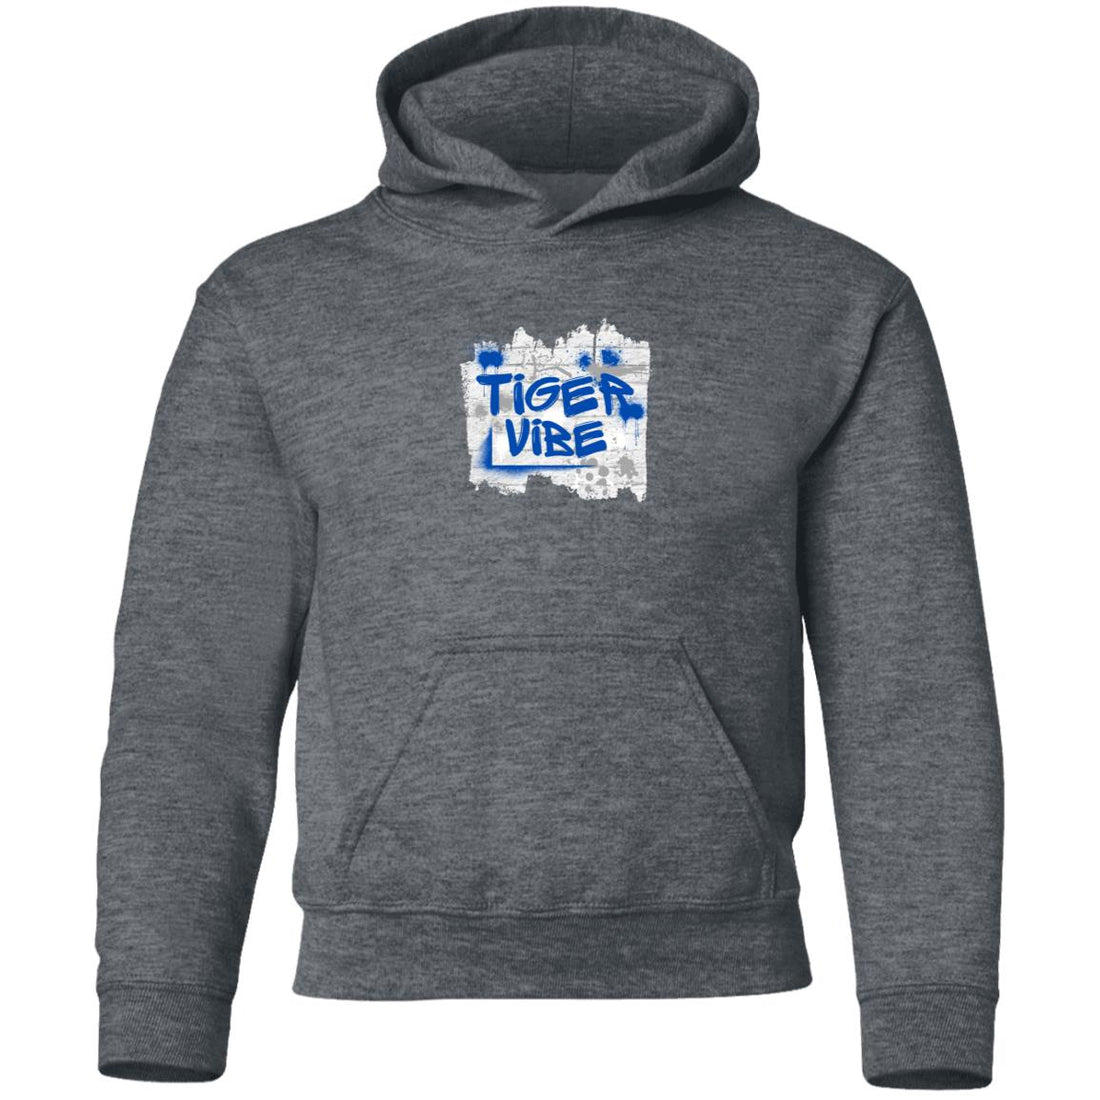 Tiger Vibe Youth Pullover Hoodie - Sweatshirts - Positively Sassy - Tiger Vibe Youth Pullover Hoodie